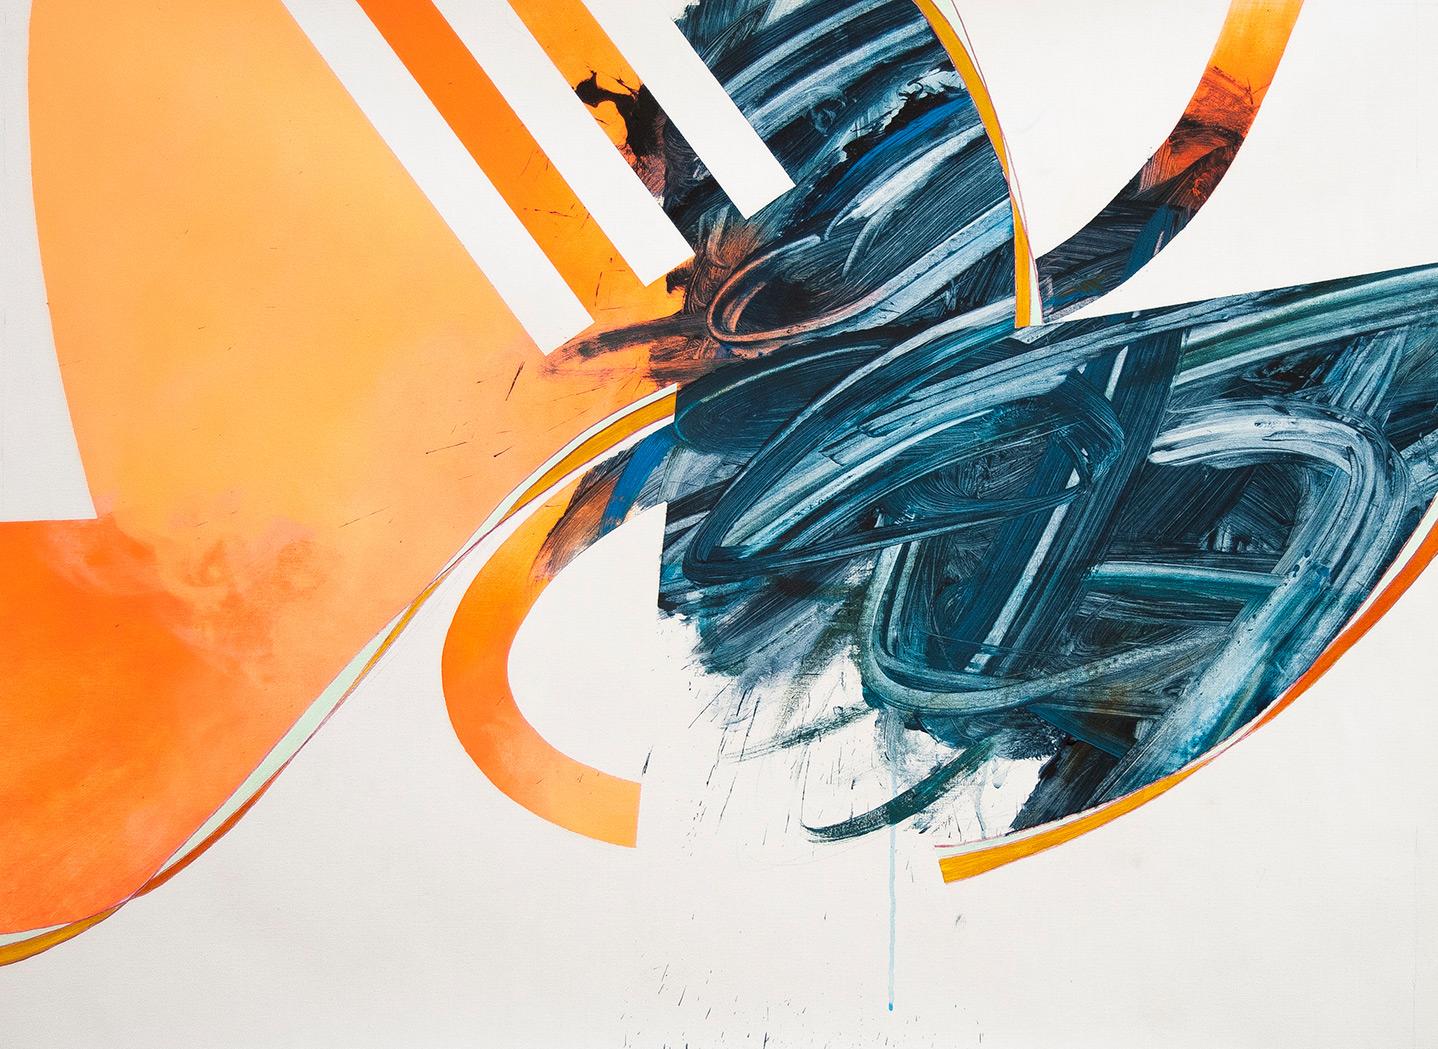 Carlos Puyol Abstract Painting - Untitled 33, energetic abstract painting, orange and blue acrylic on canvas